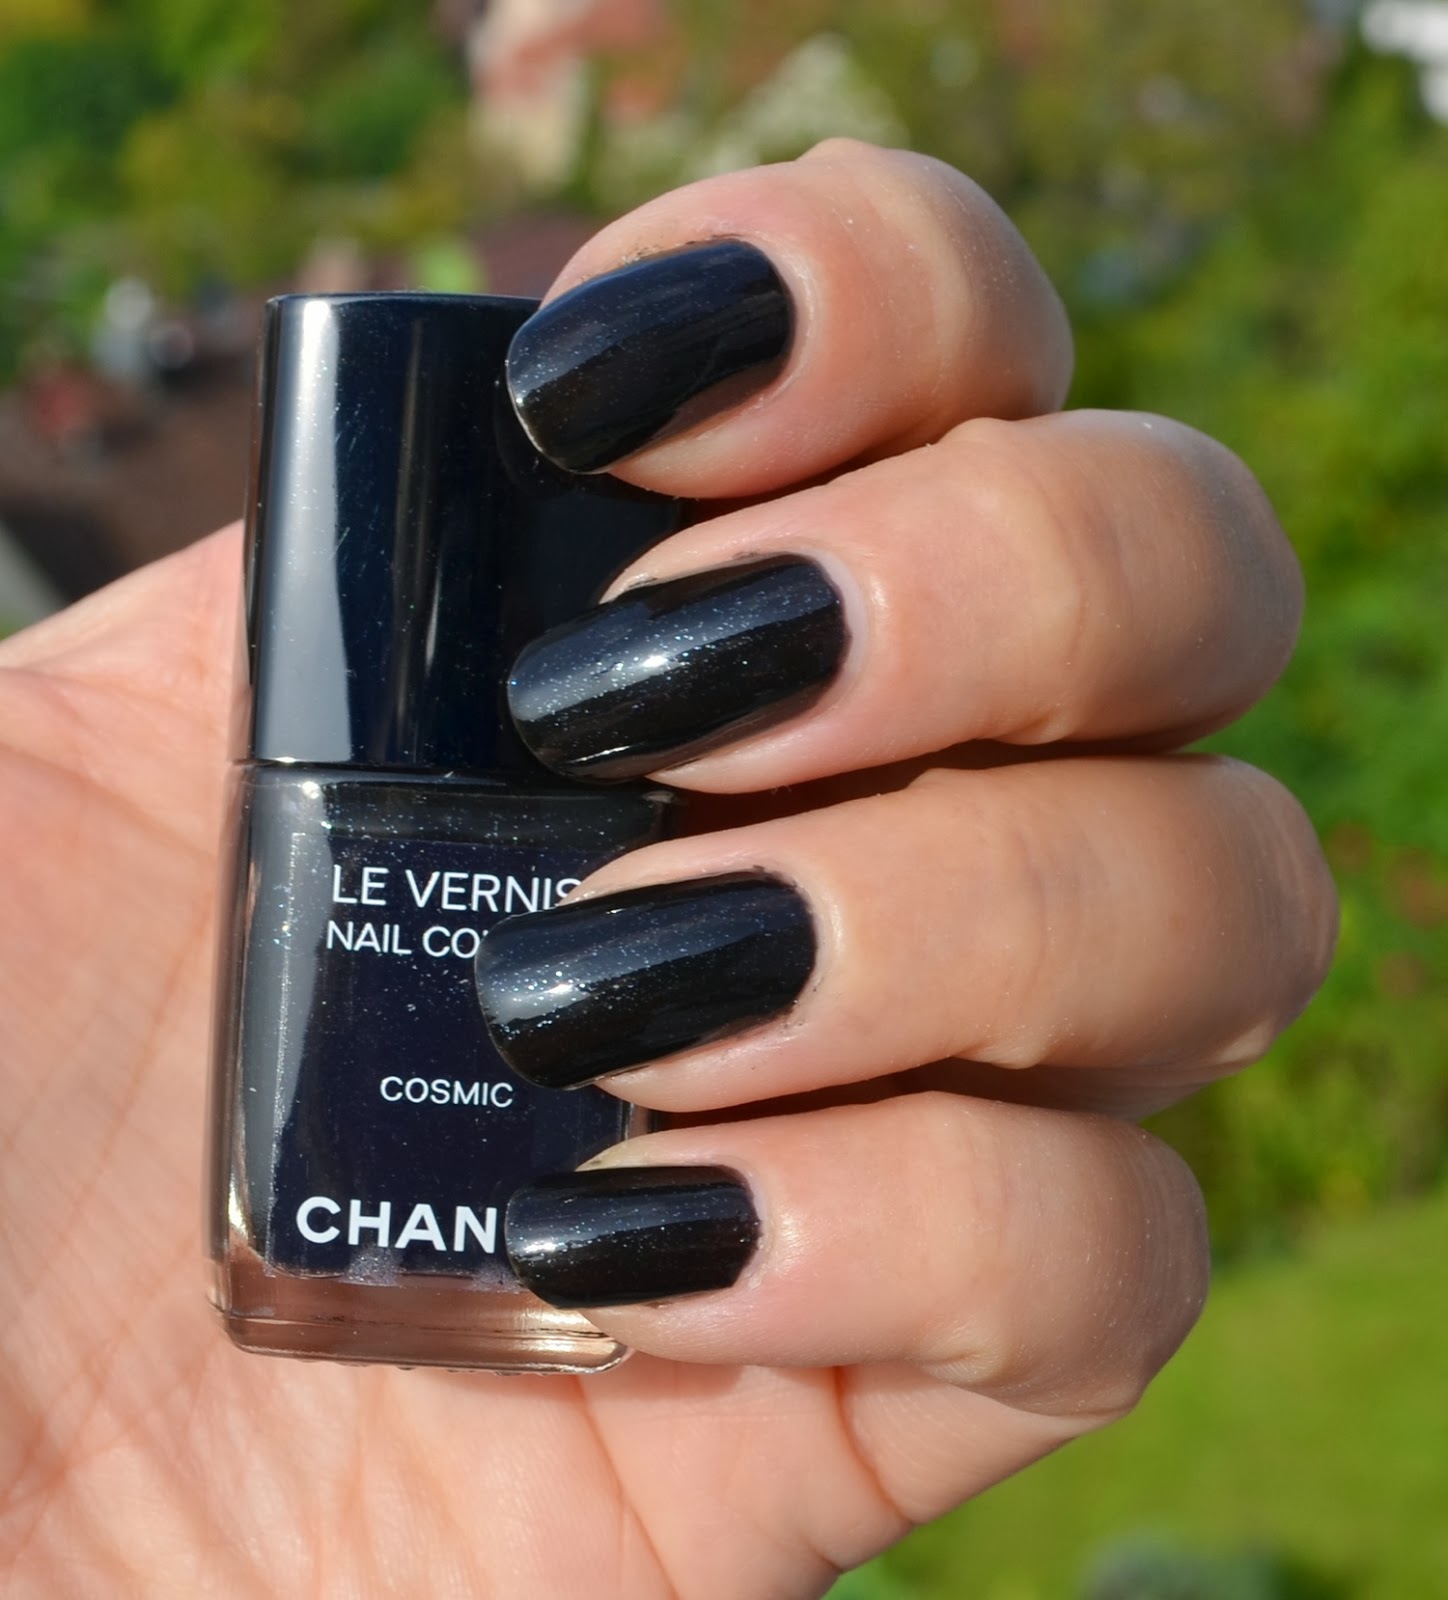 Chanel Le Vernis Cosmic & Magic, Vogue Fashion Night Out 2013 Nail